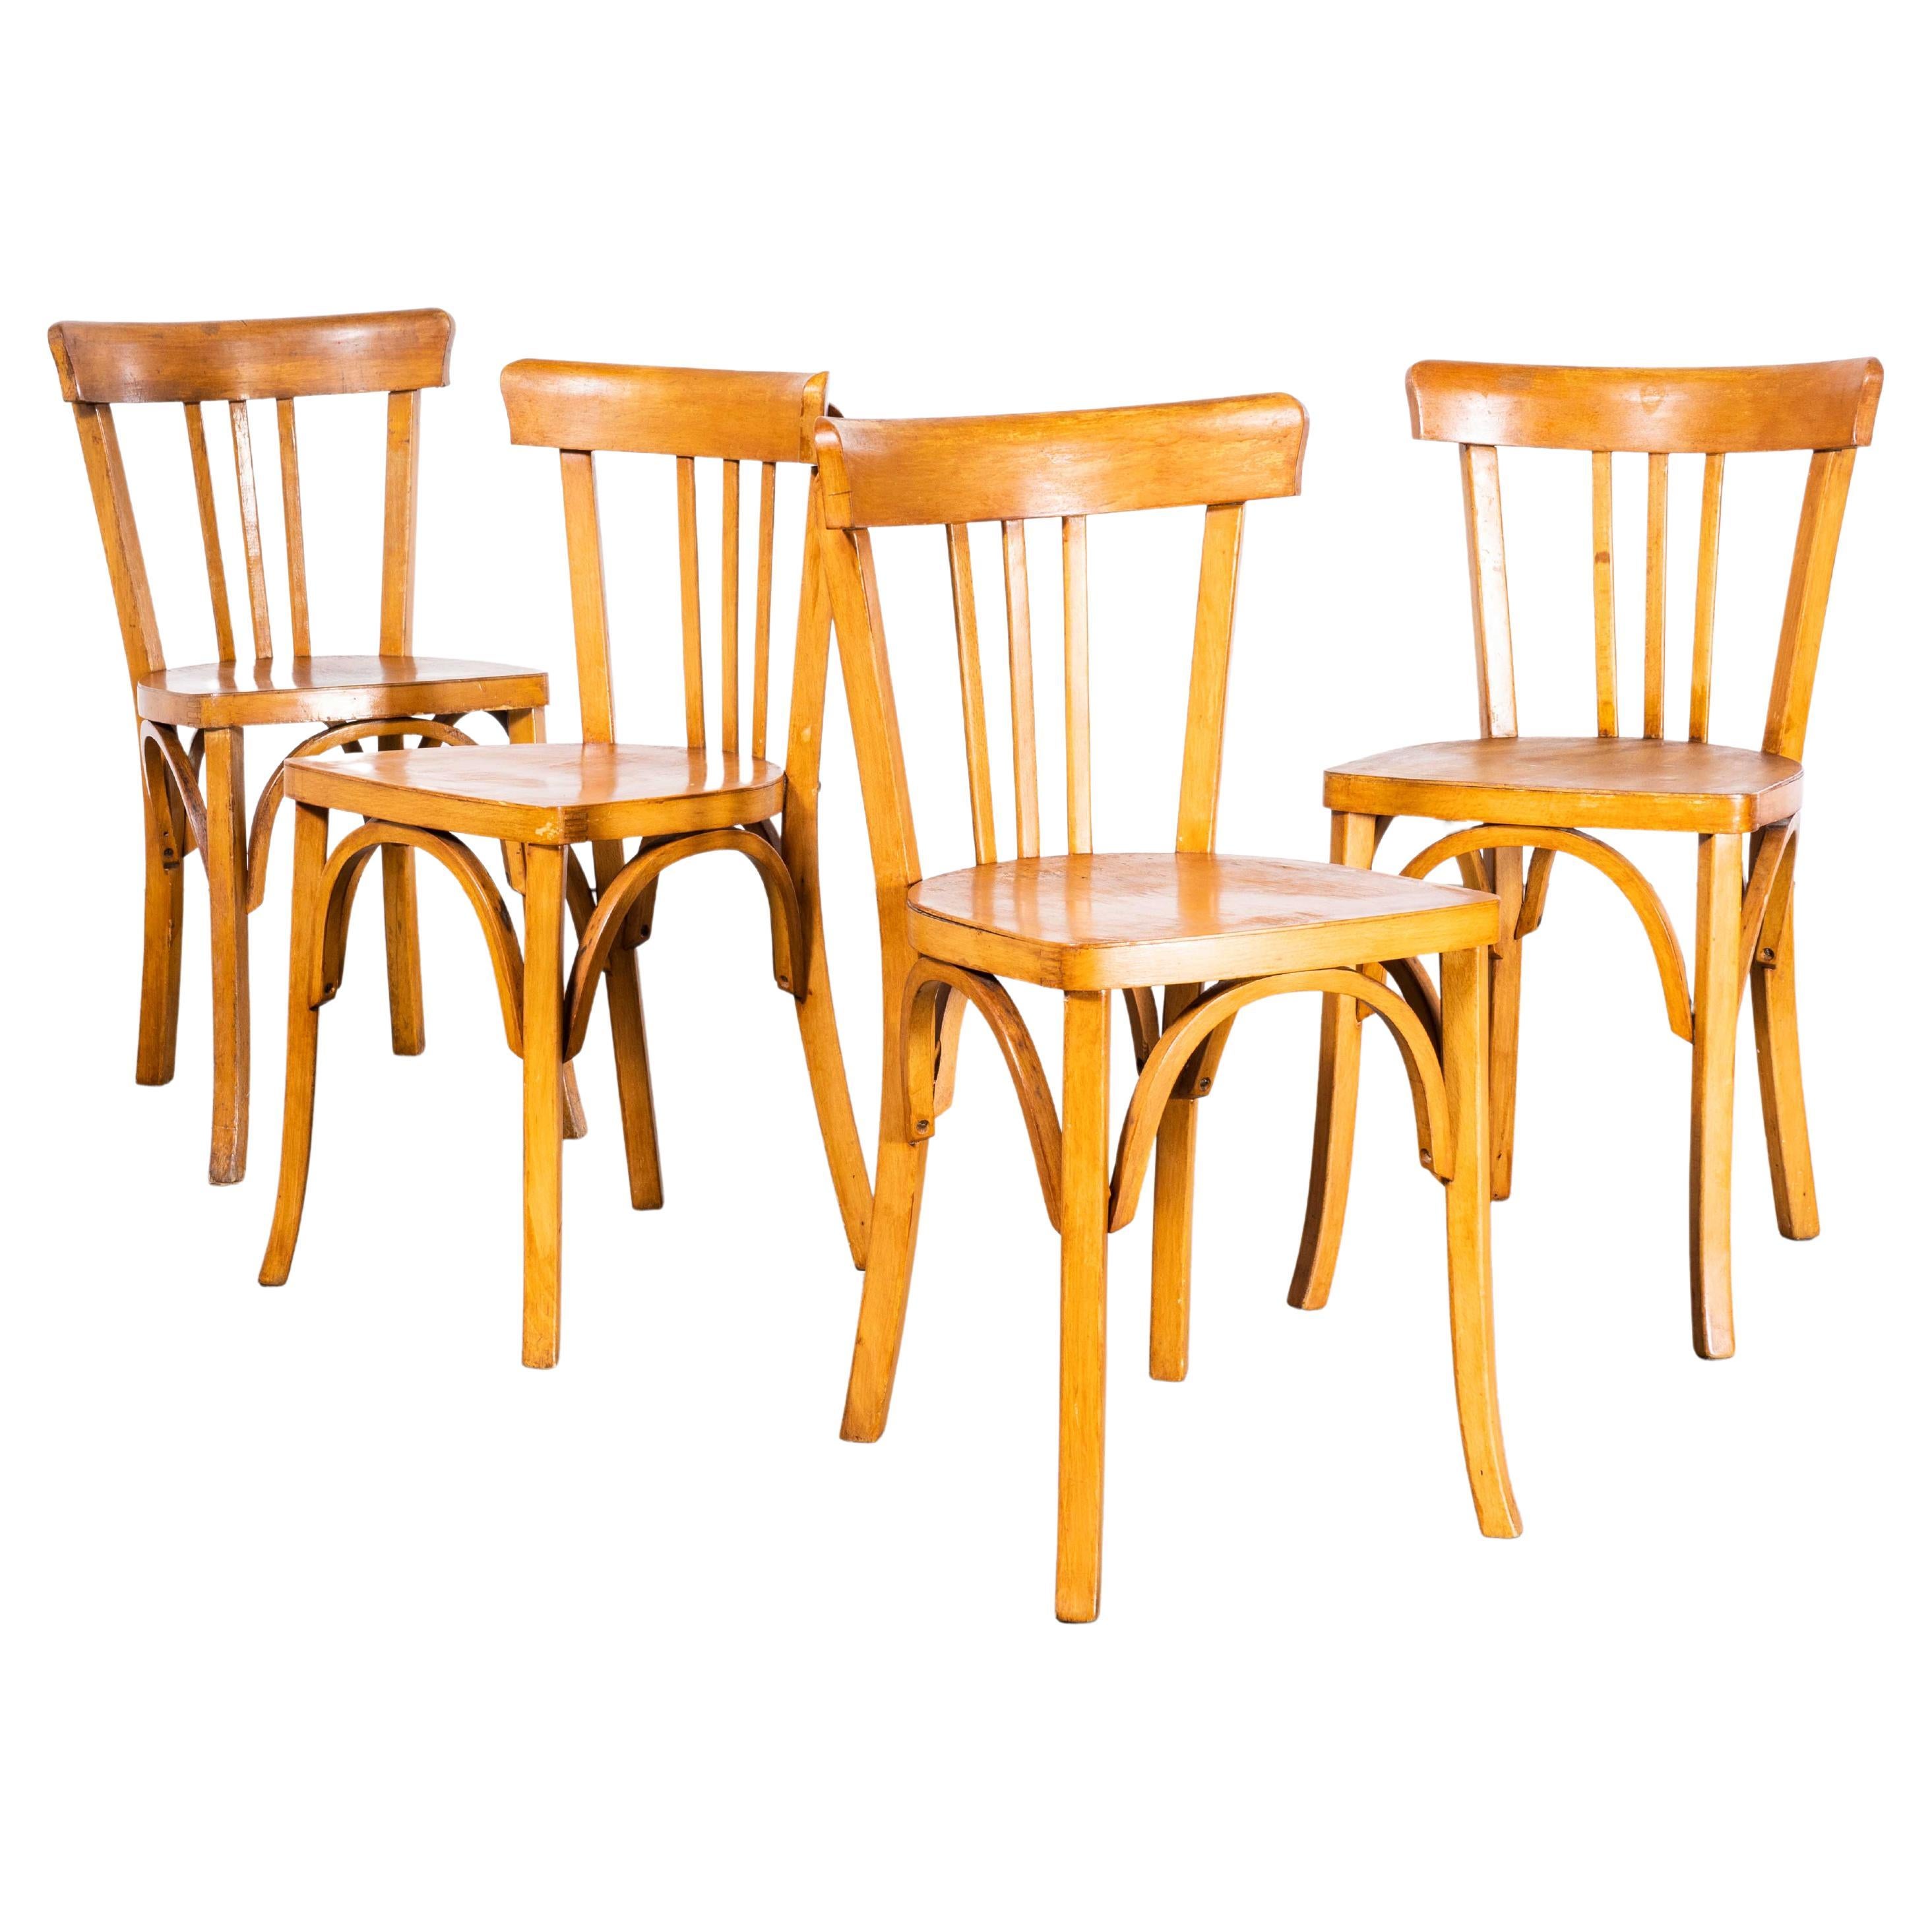 1950s Baumann Honey Tri Back Dining Chair - Set of Four For Sale